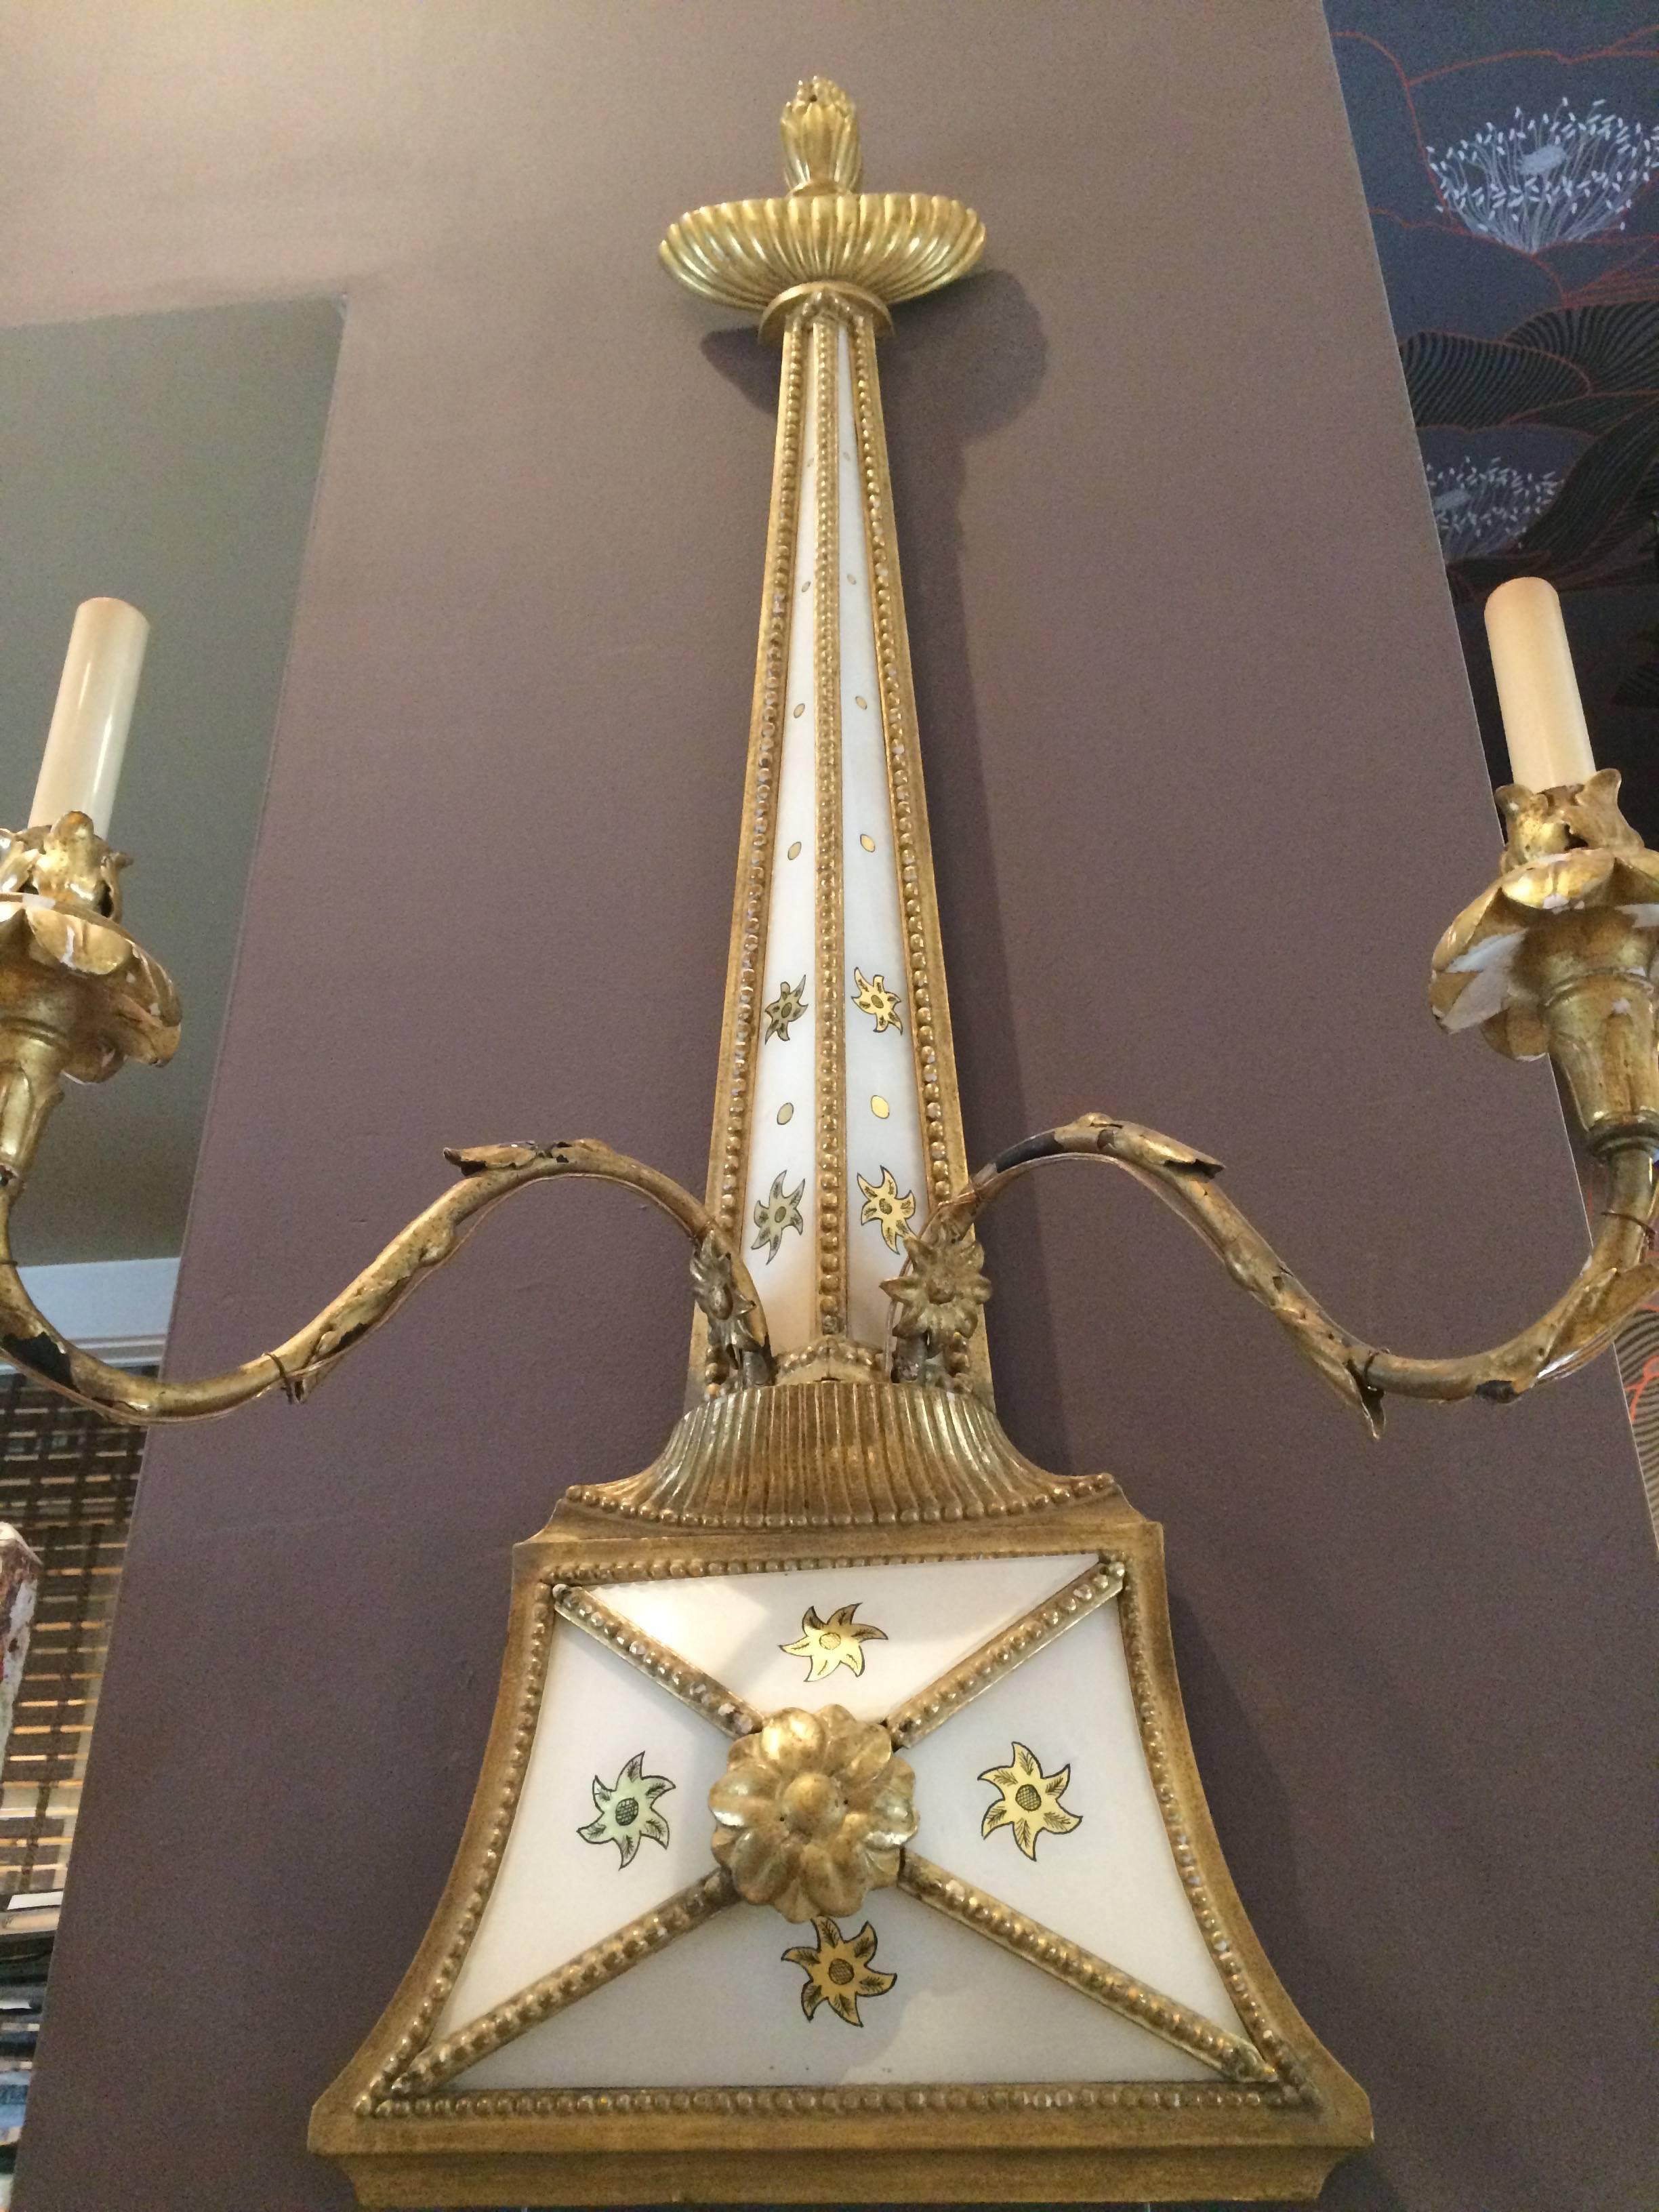 Unusual and grand pair of candle sconces with white background reverse painted with gold stars and having giltwood decoration.  Wired for electricity. Measures: Base is 13 W.